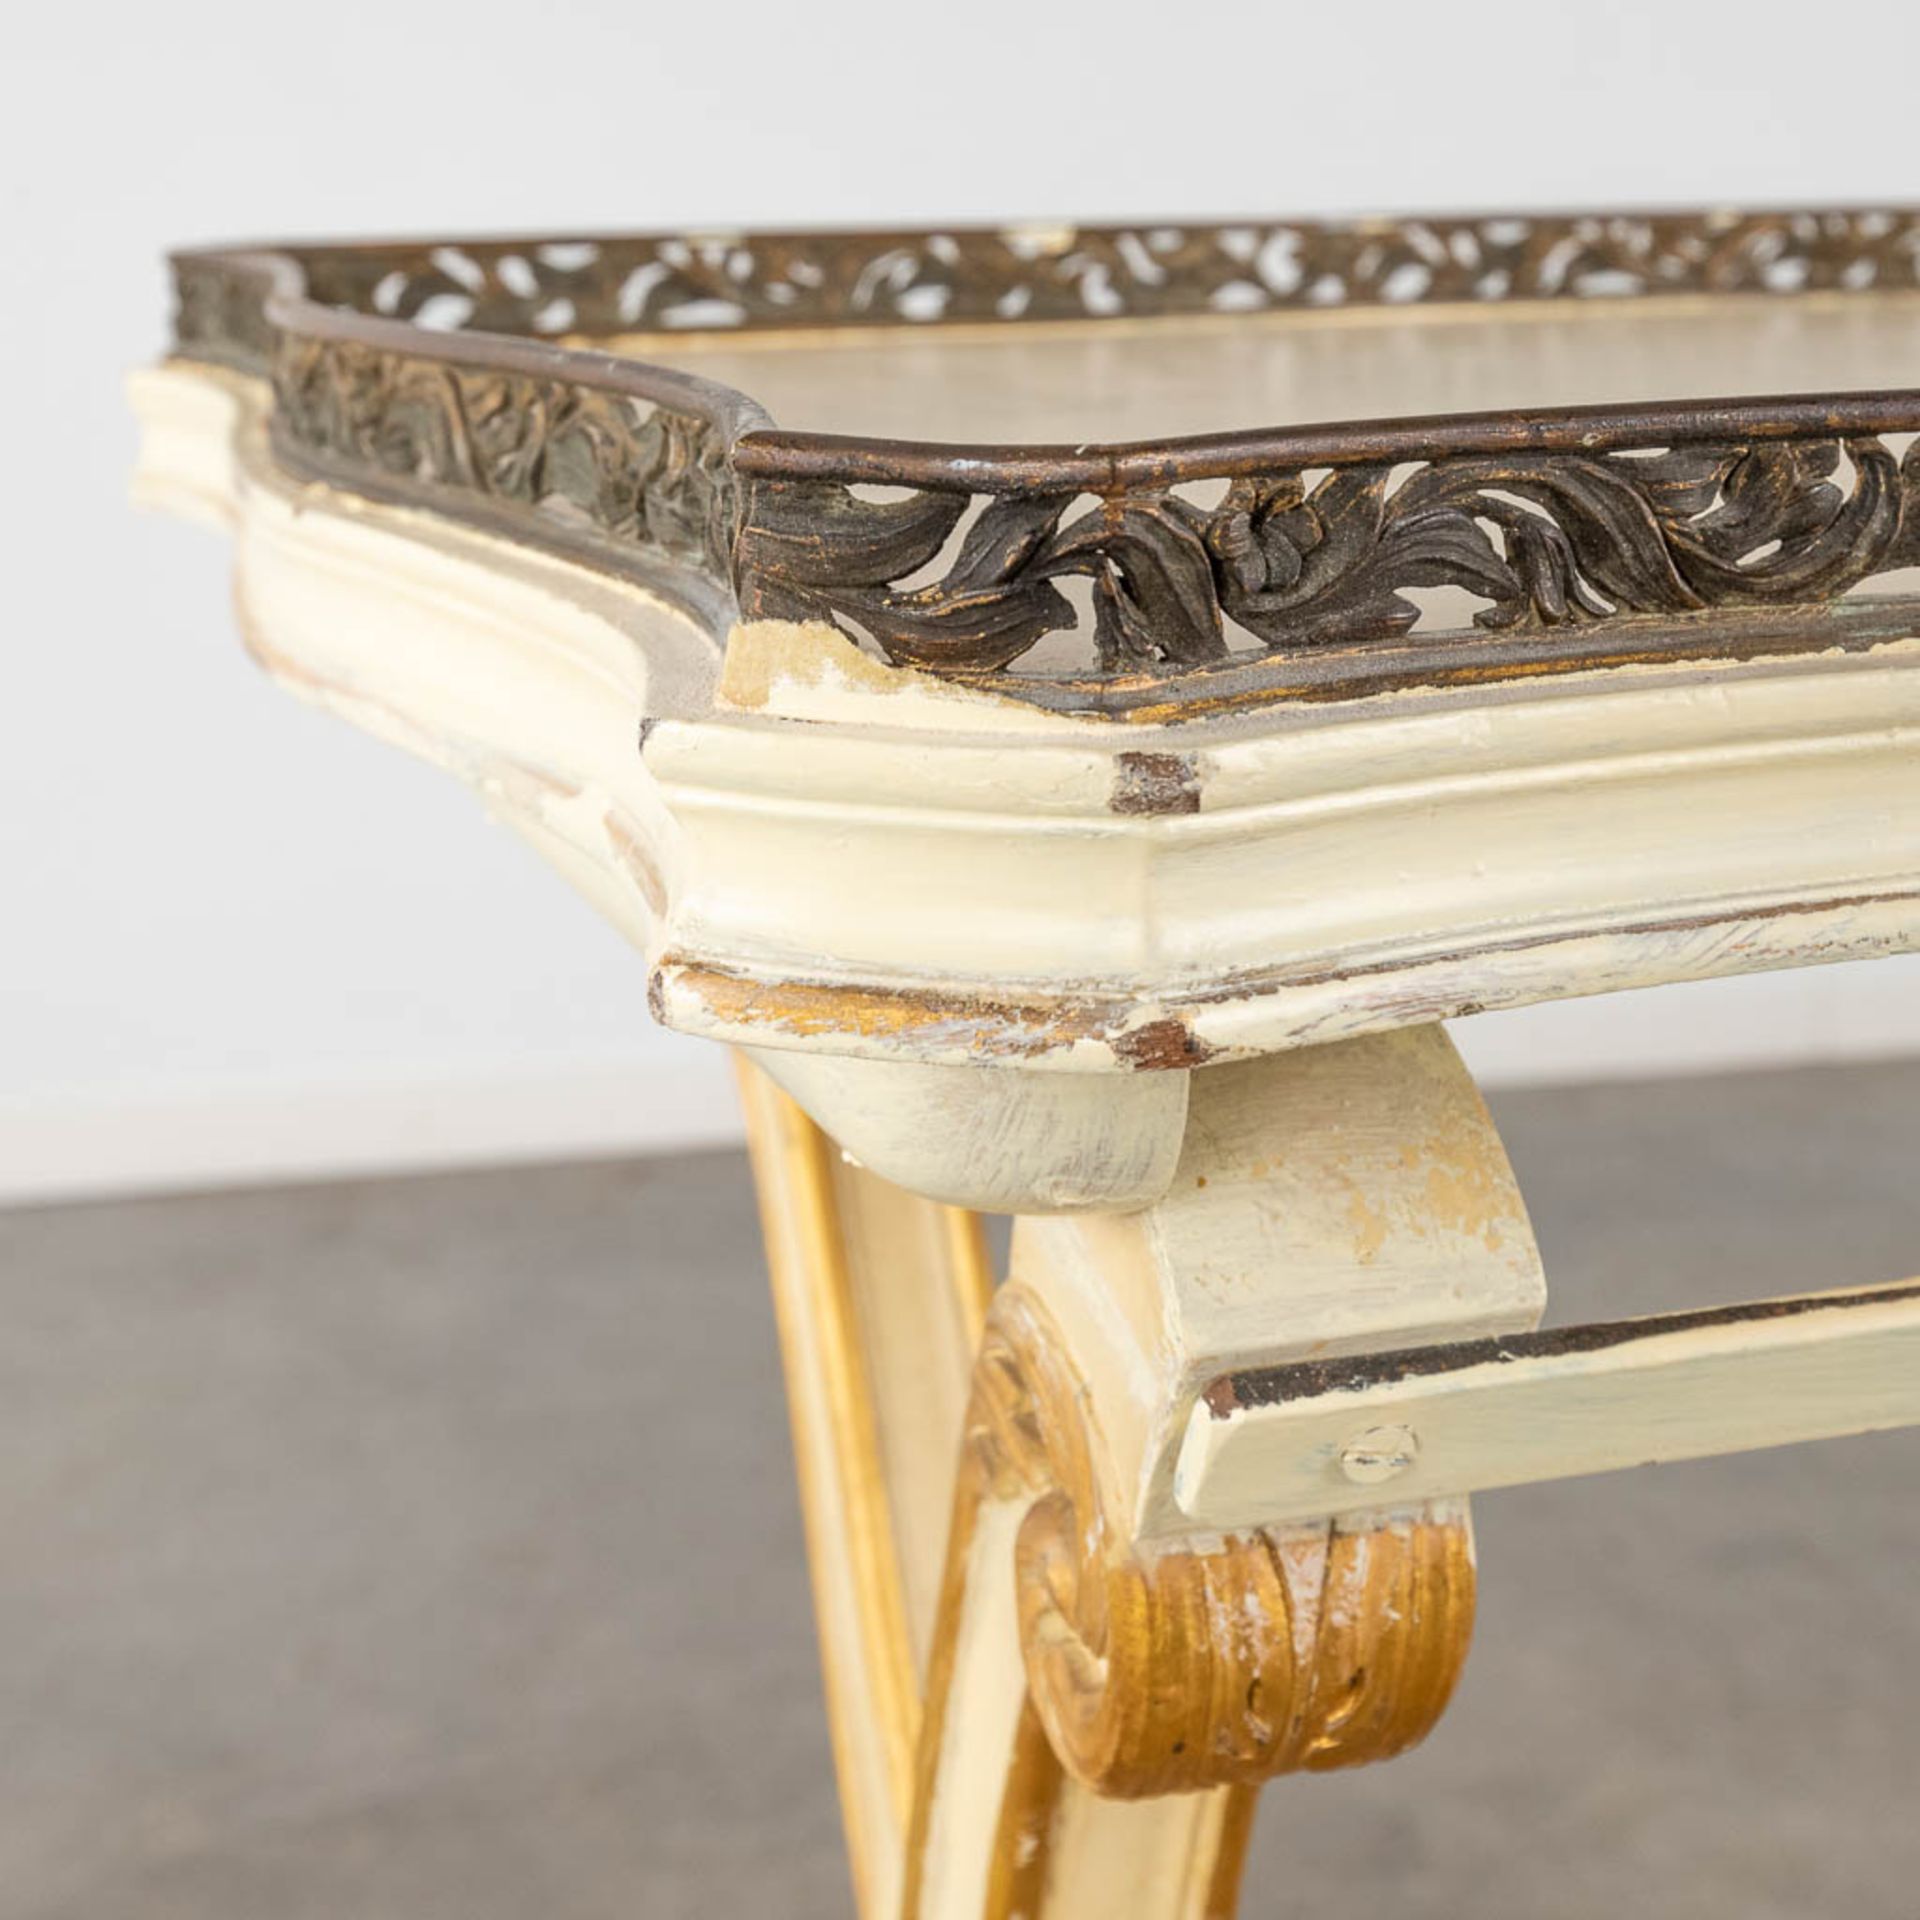 A serving table with bronze gallery, Italian style wood-sculptures. 19th C. (L:60 x W:89 x H:79 cm) - Bild 9 aus 14